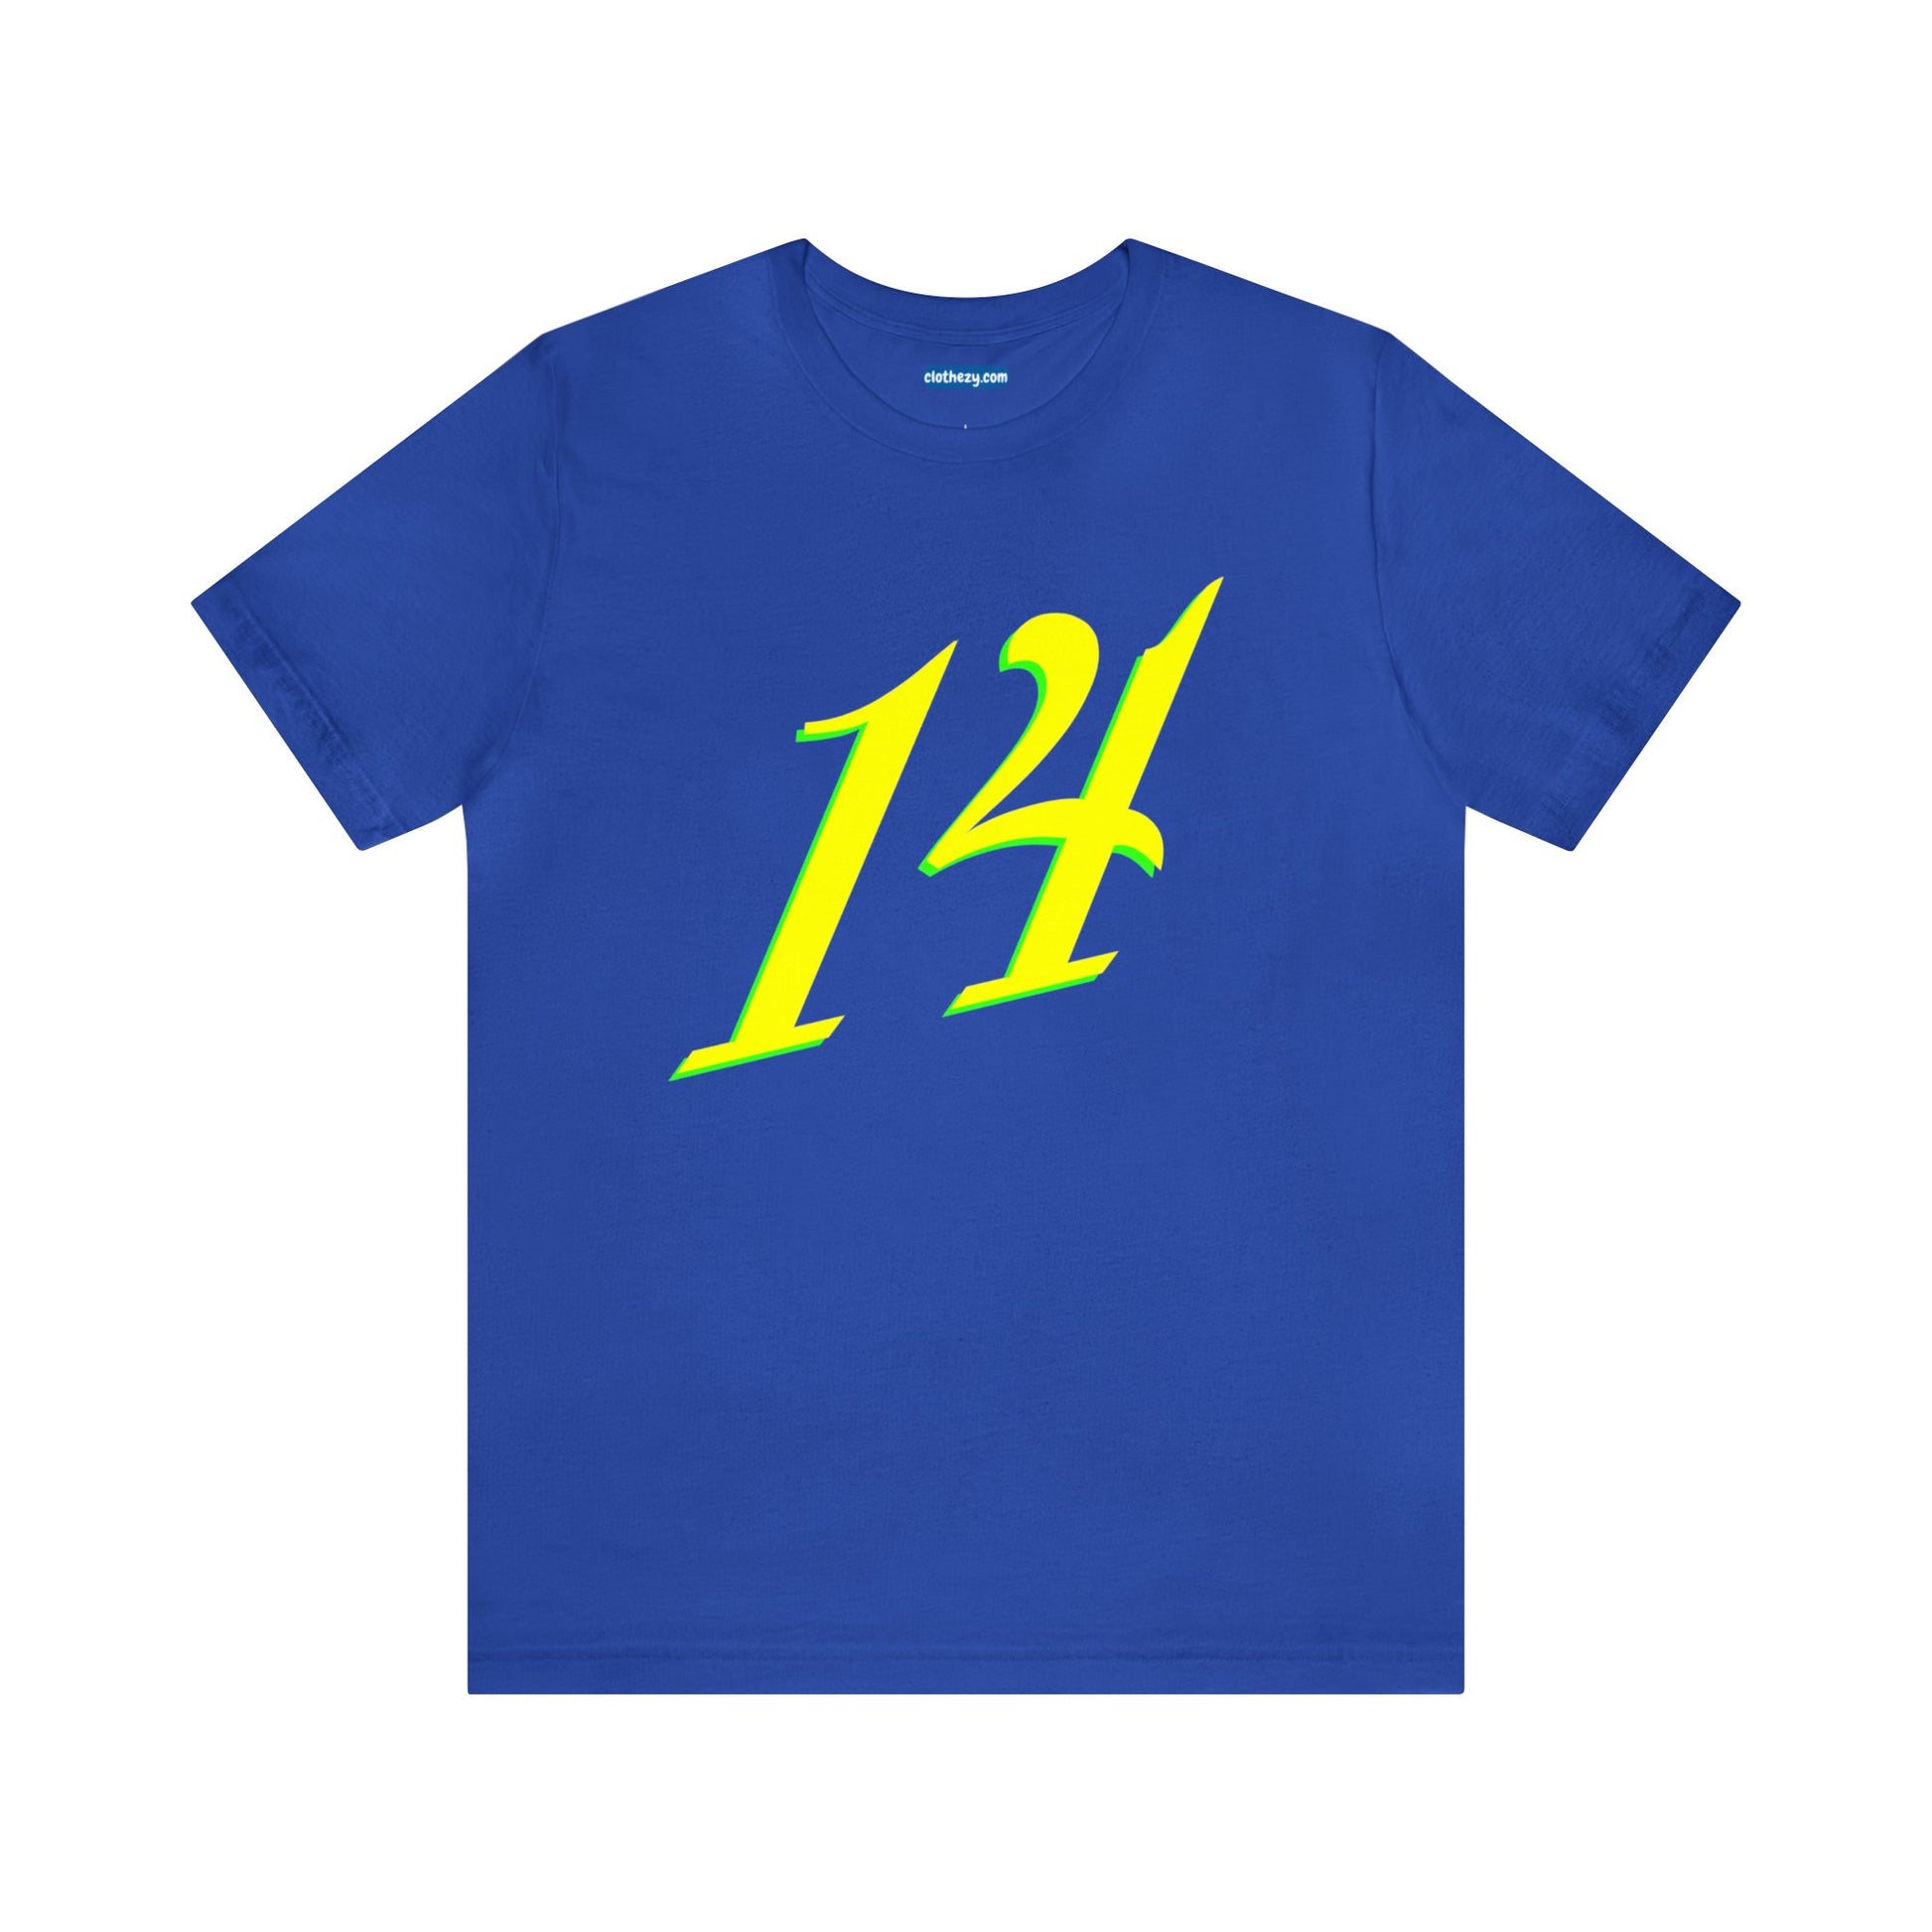 Number 14 Design - Soft Cotton Tee for birthdays and celebrations, Gift for friends and family, Multiple Options by clothezy.com in Royal Blue Size Small - Buy Now